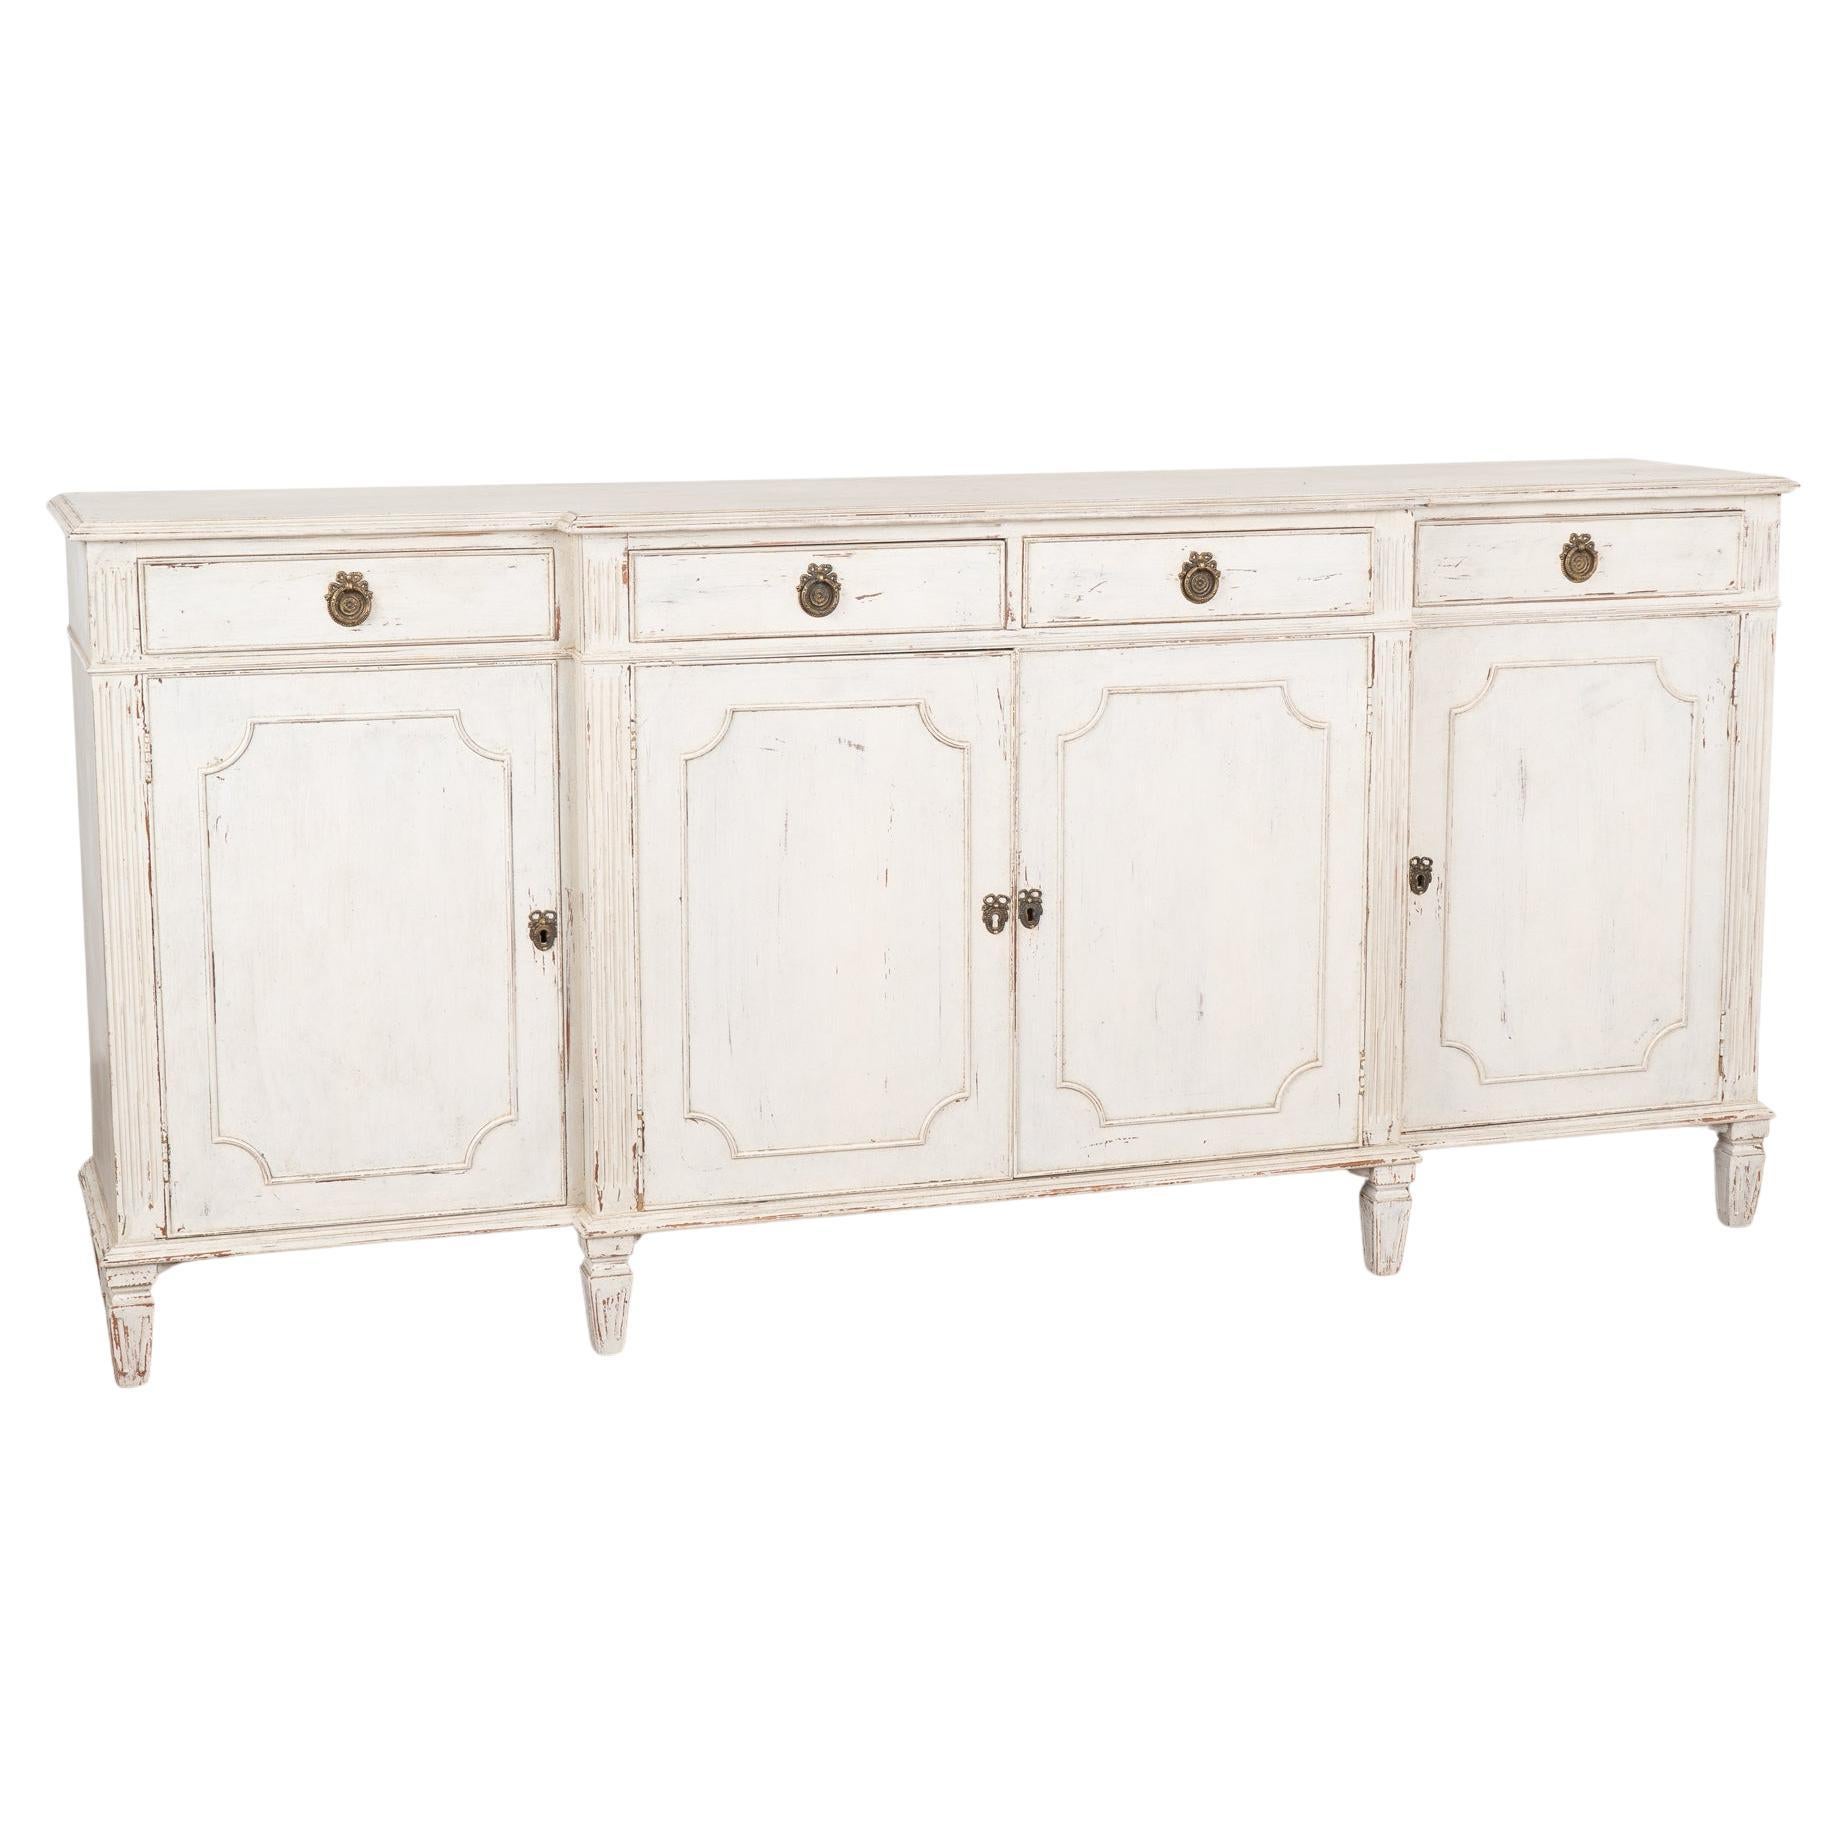 White Painted Sideboard Buffet, Sweden circa 1920